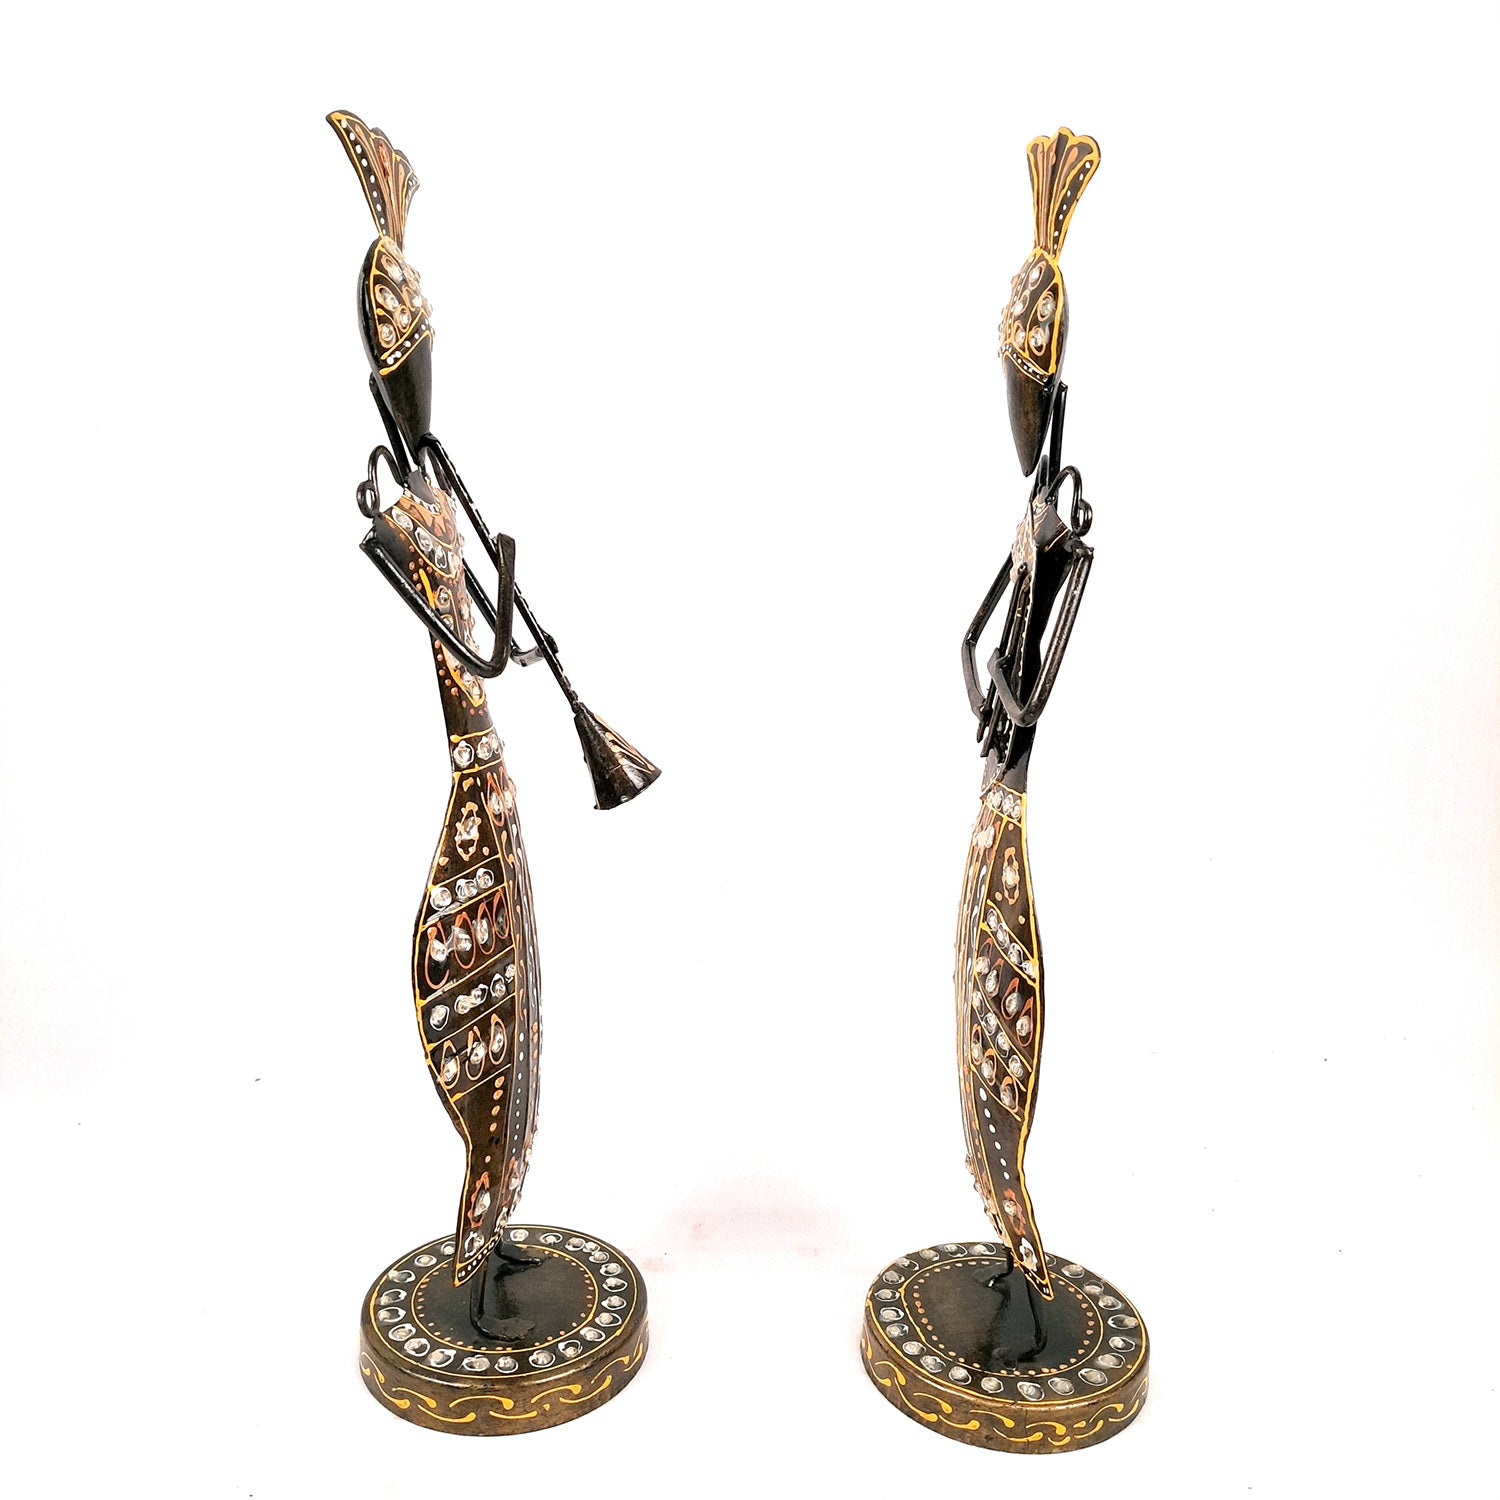 Showpiece Musician Playing Traditional Musical Instruments | Decorative Figurines - For Home, Table, Living Room & TV Unit | Show Piece For Office Desk & Gifts - 17 Inch (Set of 2) - Apkamart